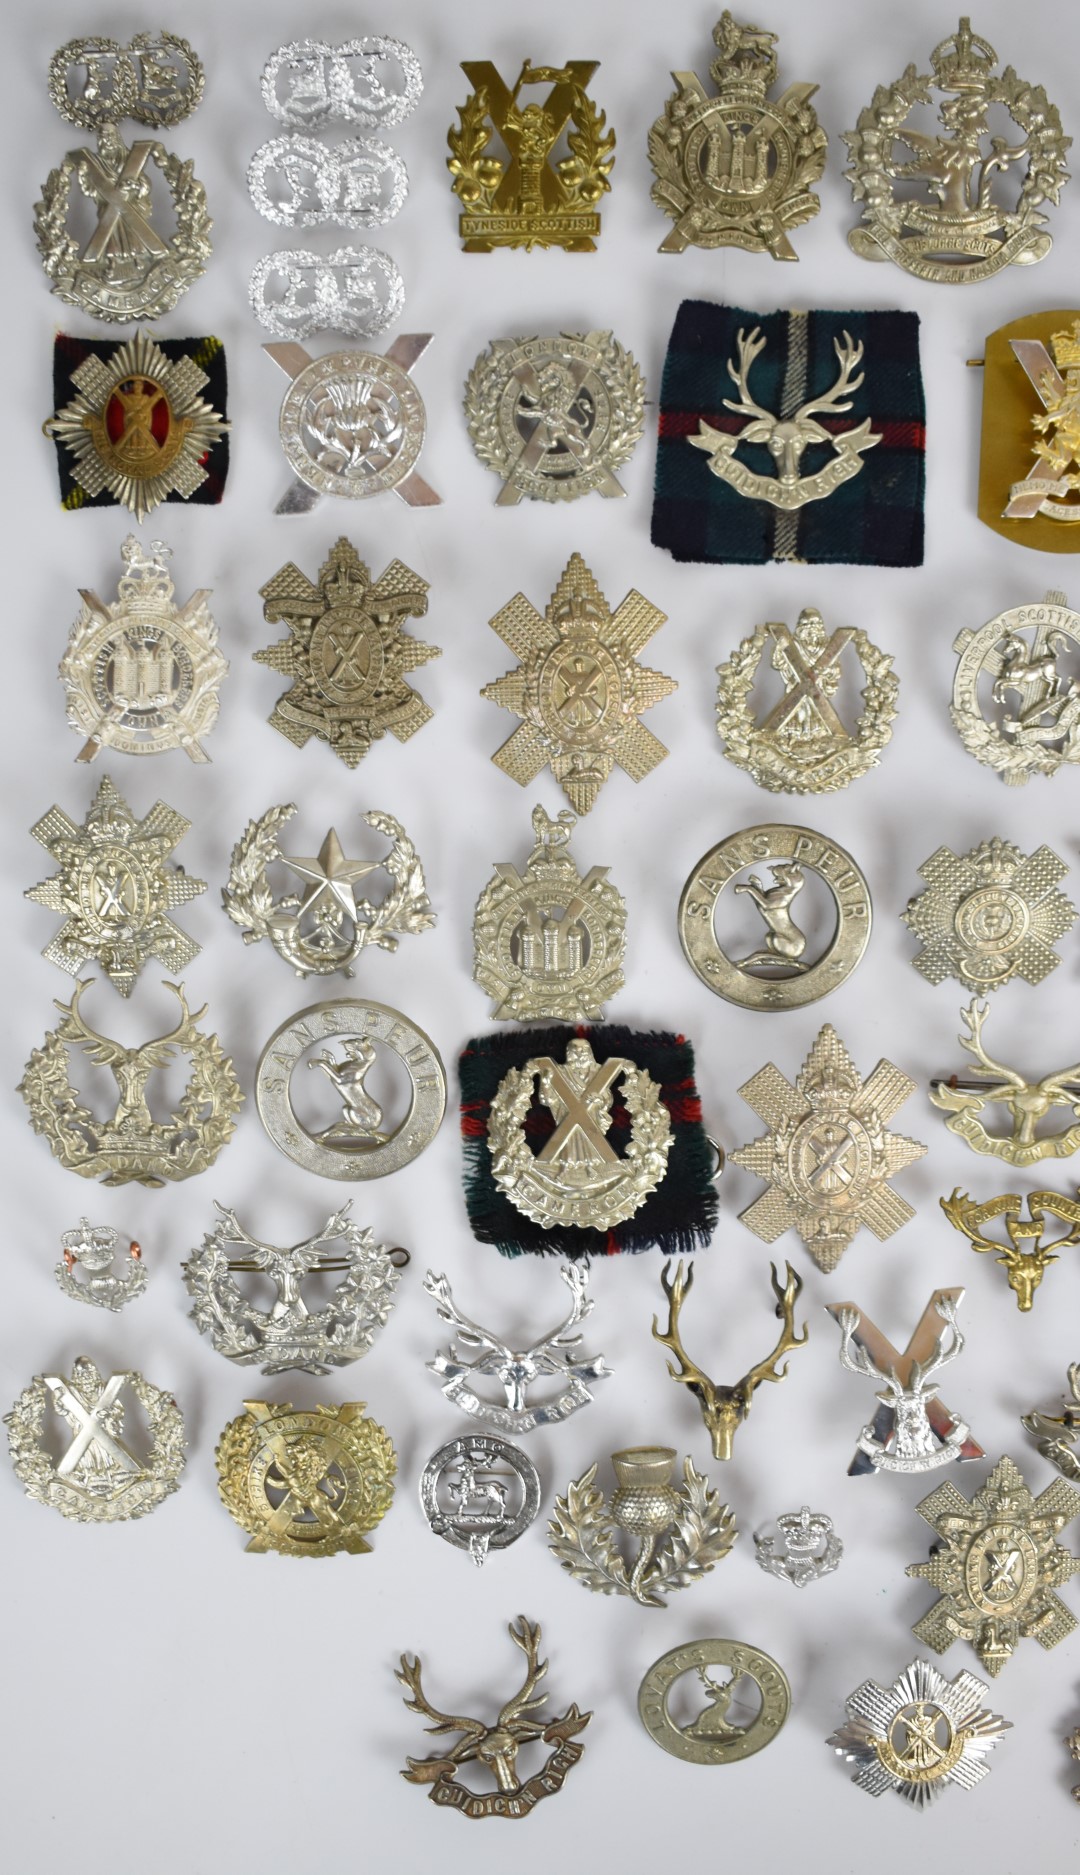 Collection of approximately 60 British Army Scottish Regiment badges including Royal Scots Guards, - Image 5 of 6